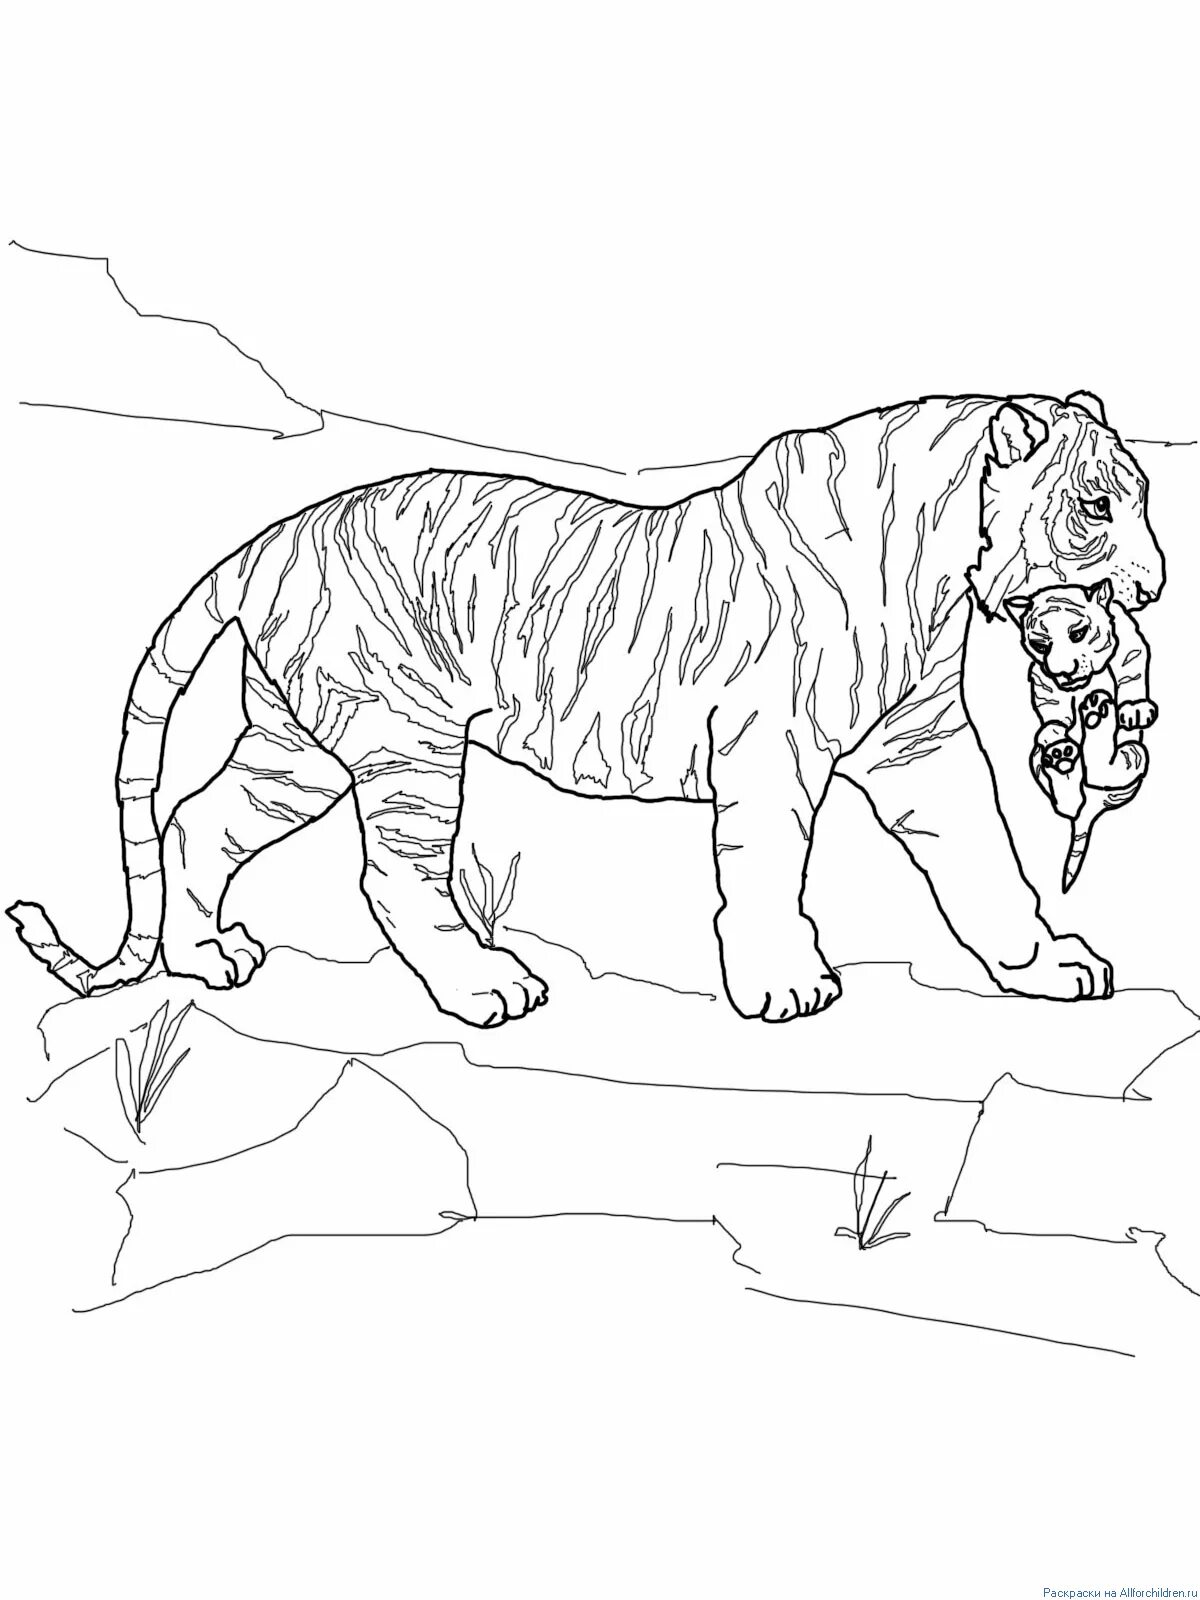 Attractive coloring of the Amur tiger